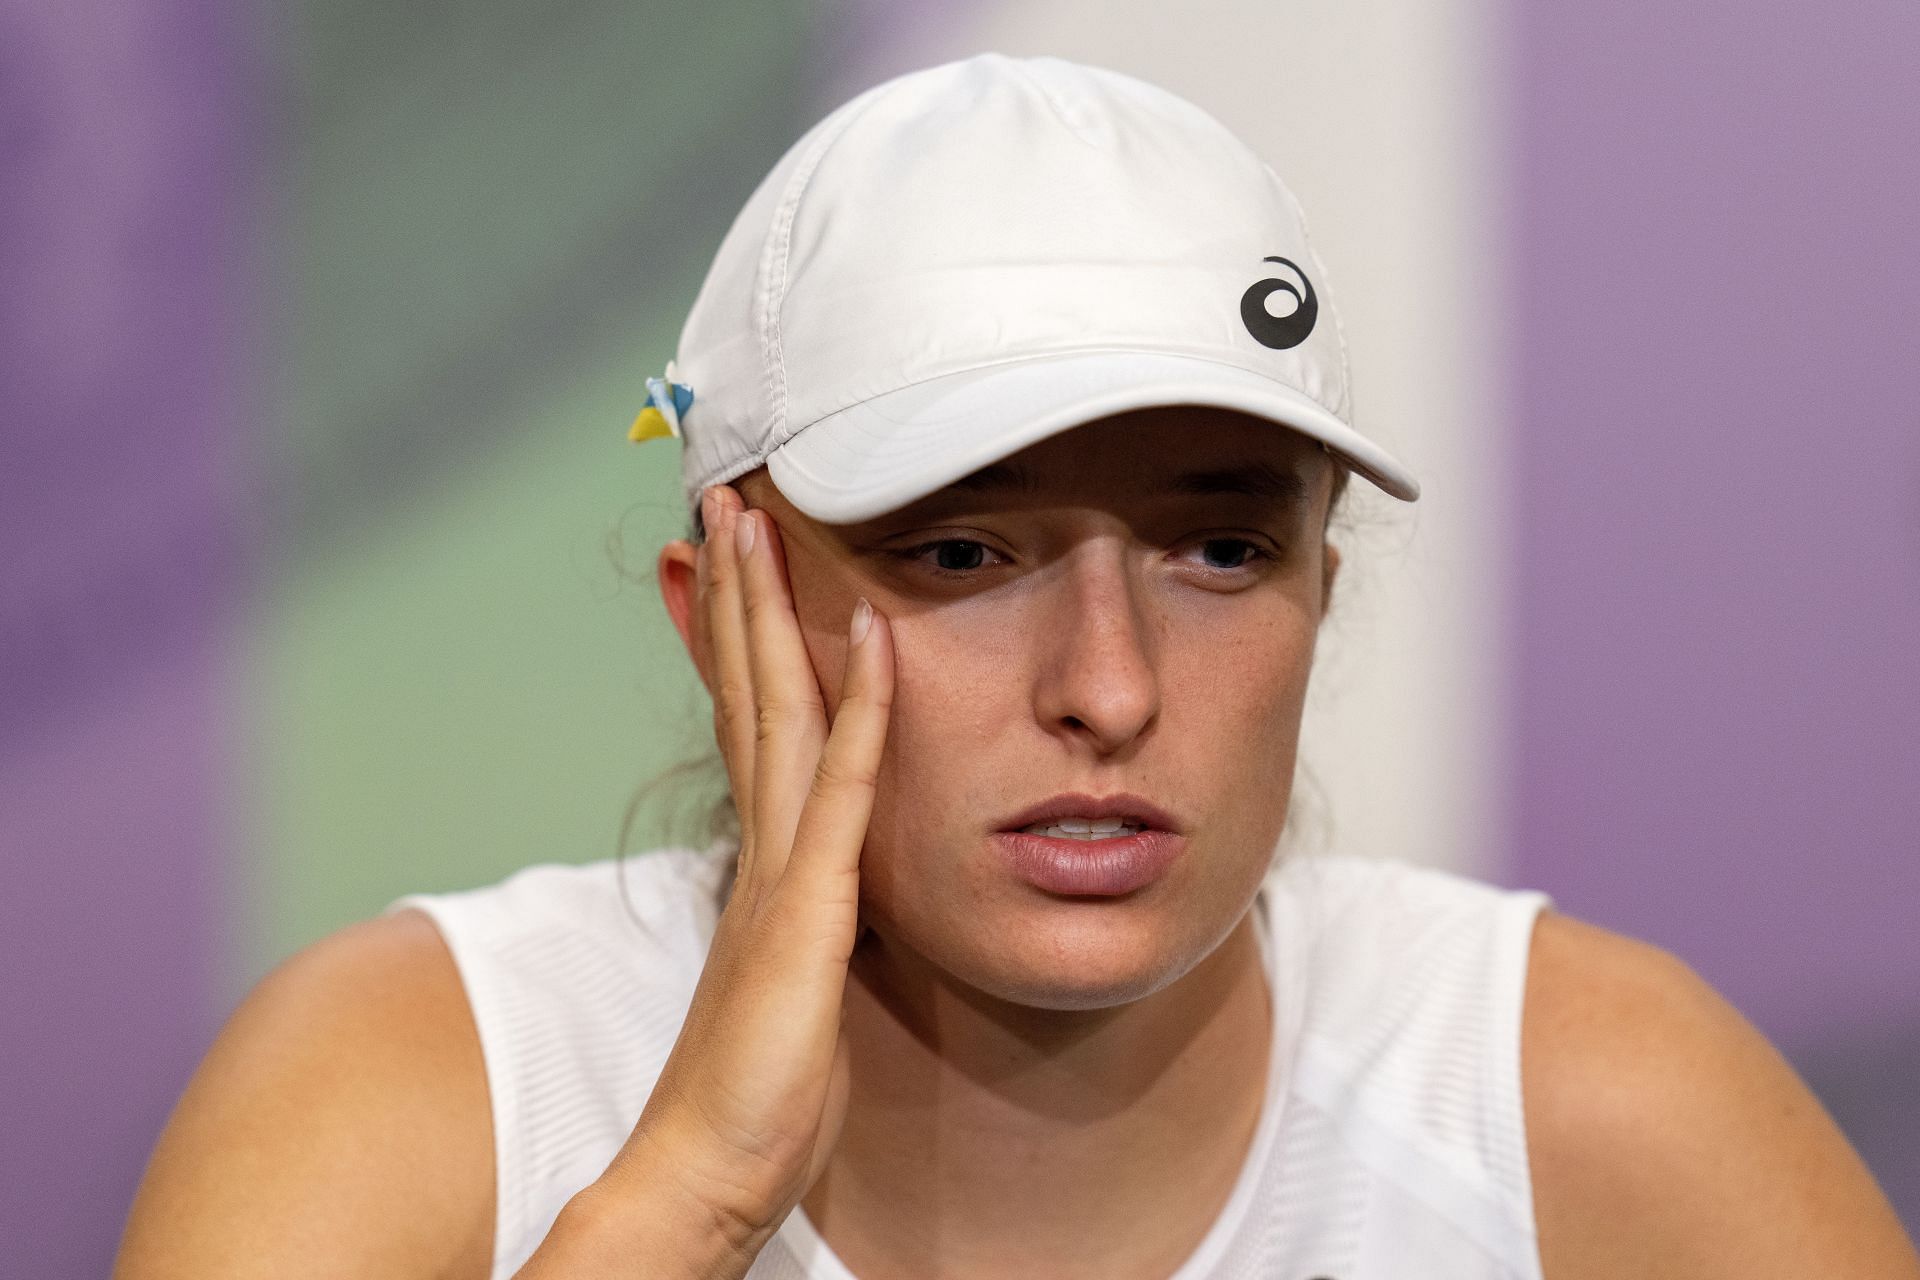 Iga Swiatek at a press conference. Photo by AELTC/Joe Toth - Pool/Getty Images